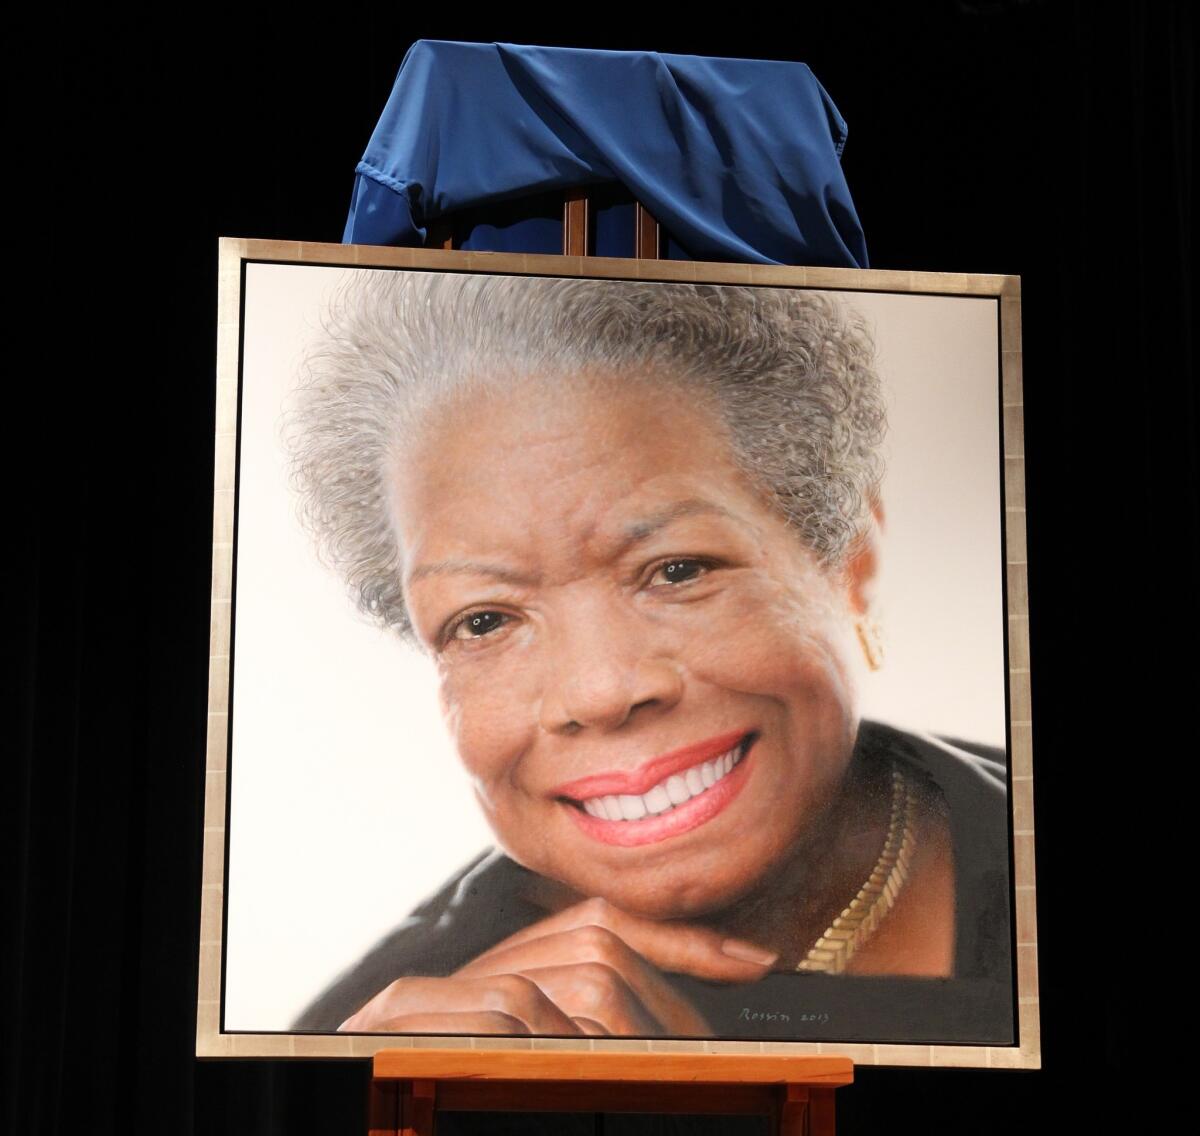 A portrait of Maya Angelou at its unveiling April 5 at the Smithsonian's National Portrait Gallery in Washington.